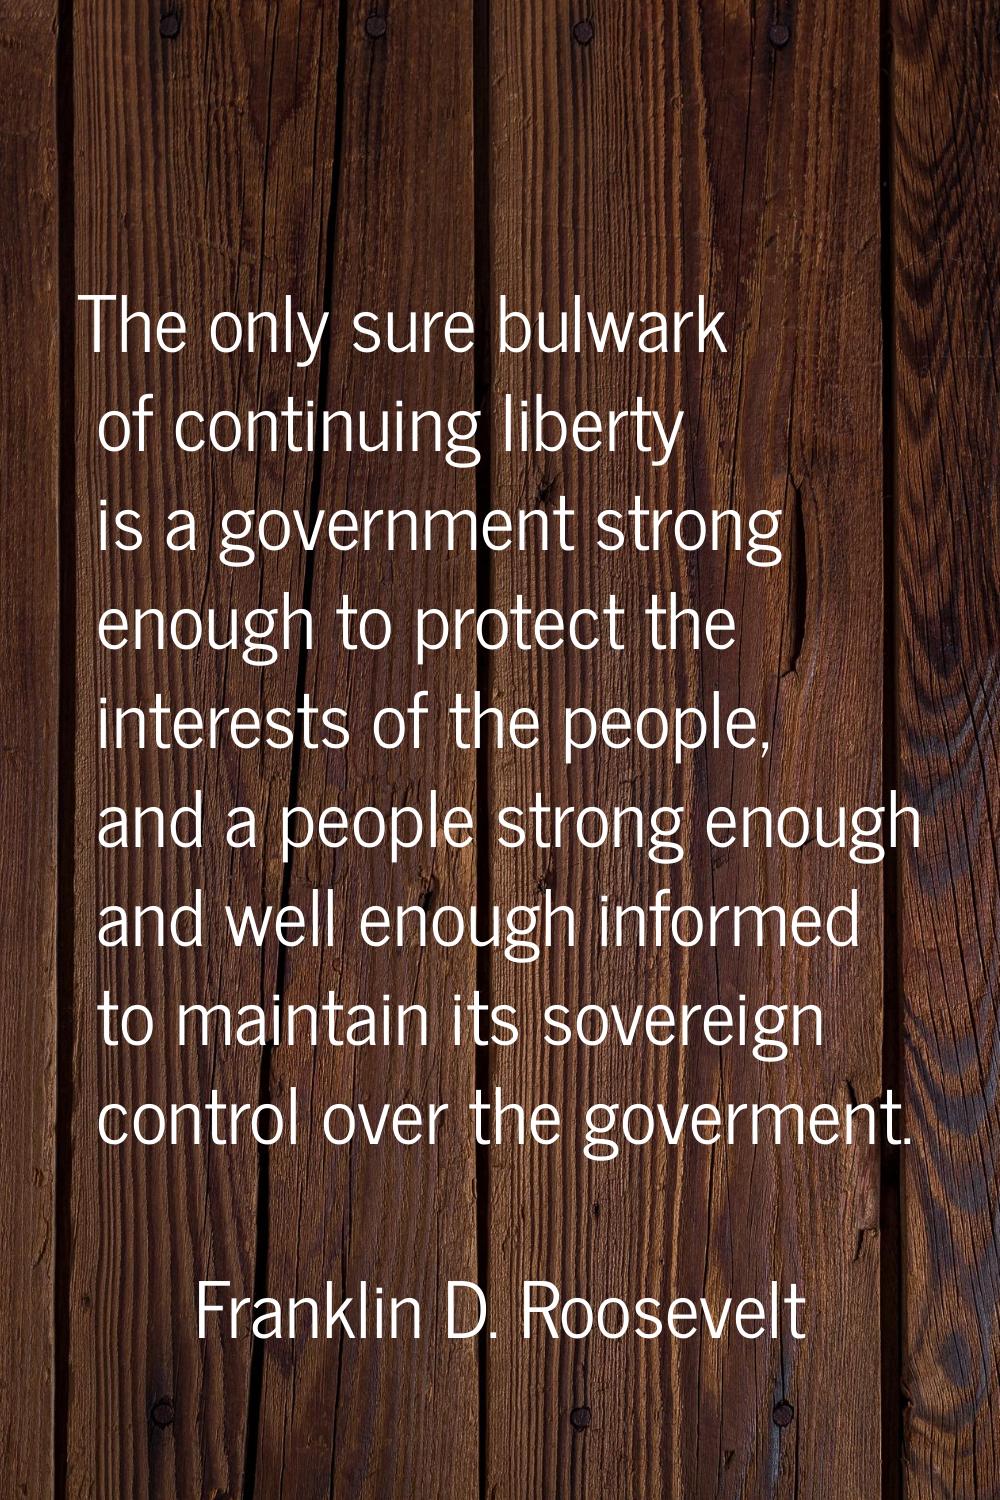 The only sure bulwark of continuing liberty is a government strong enough to protect the interests 